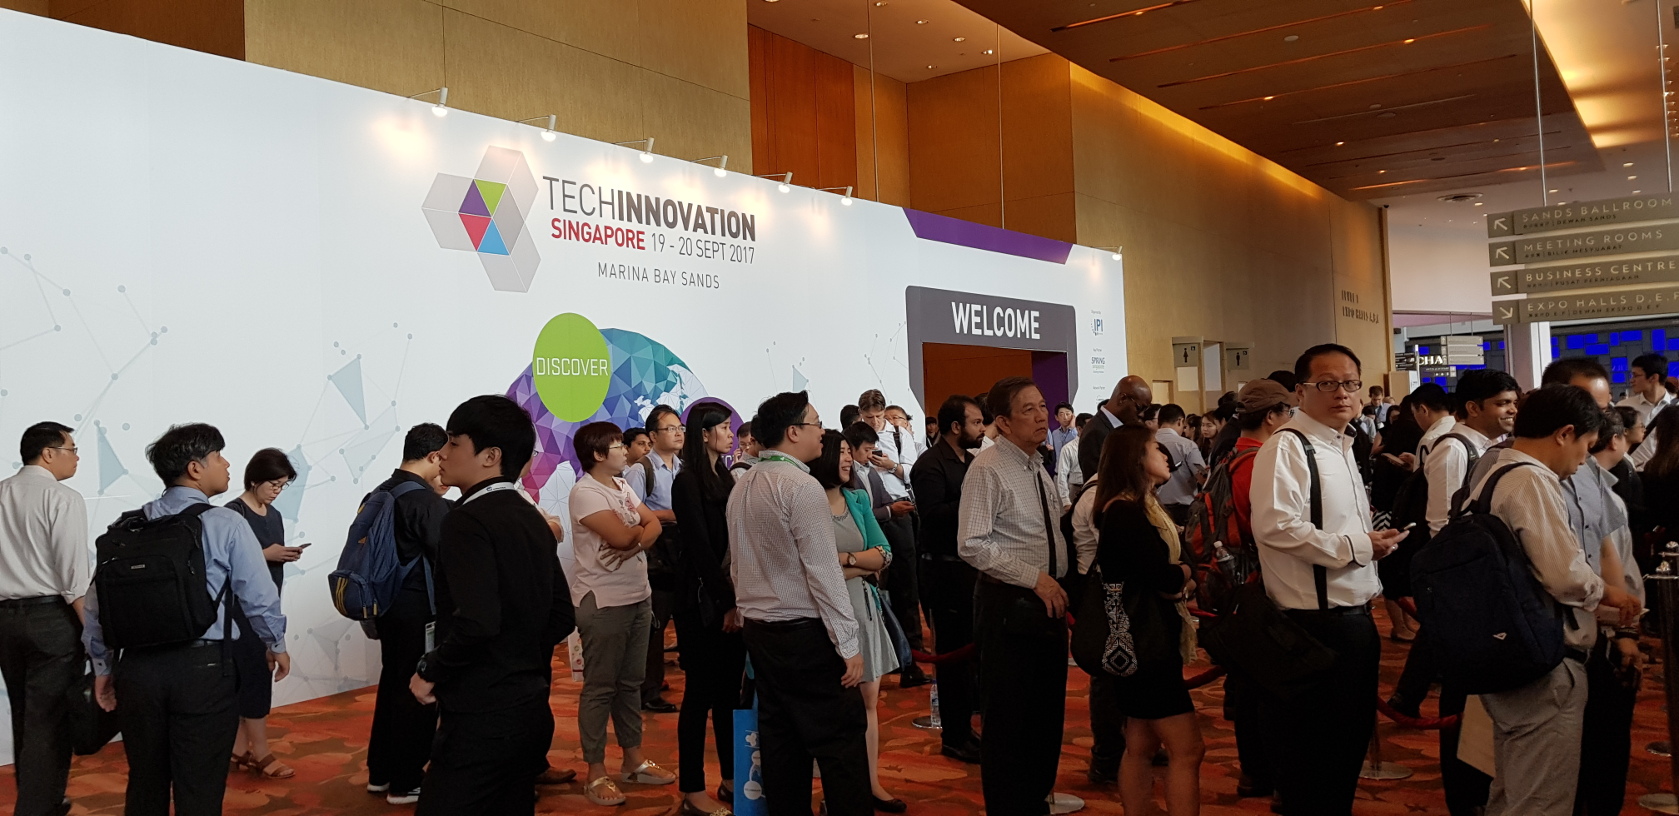 Trade visitors queuing to get their event badge for Techinnovation image